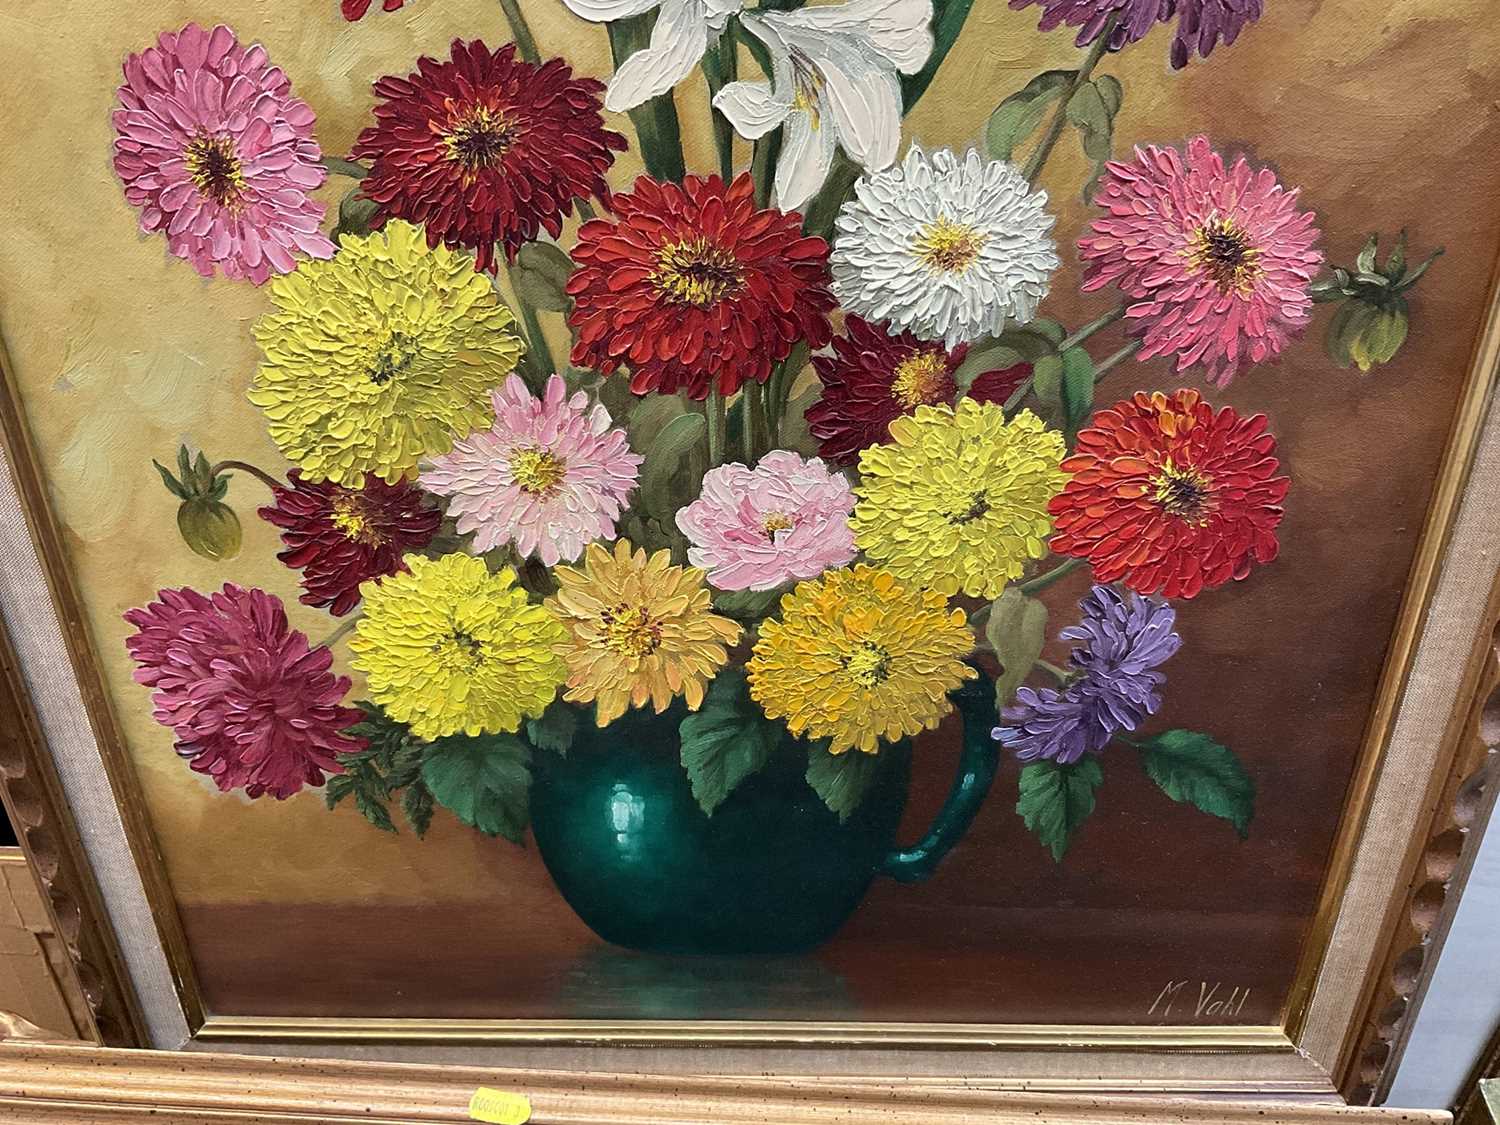 Magdalene Vahl, Canadian School, 20th century, oil on canvas - still life entitled Zinnias and Marig - Image 7 of 7